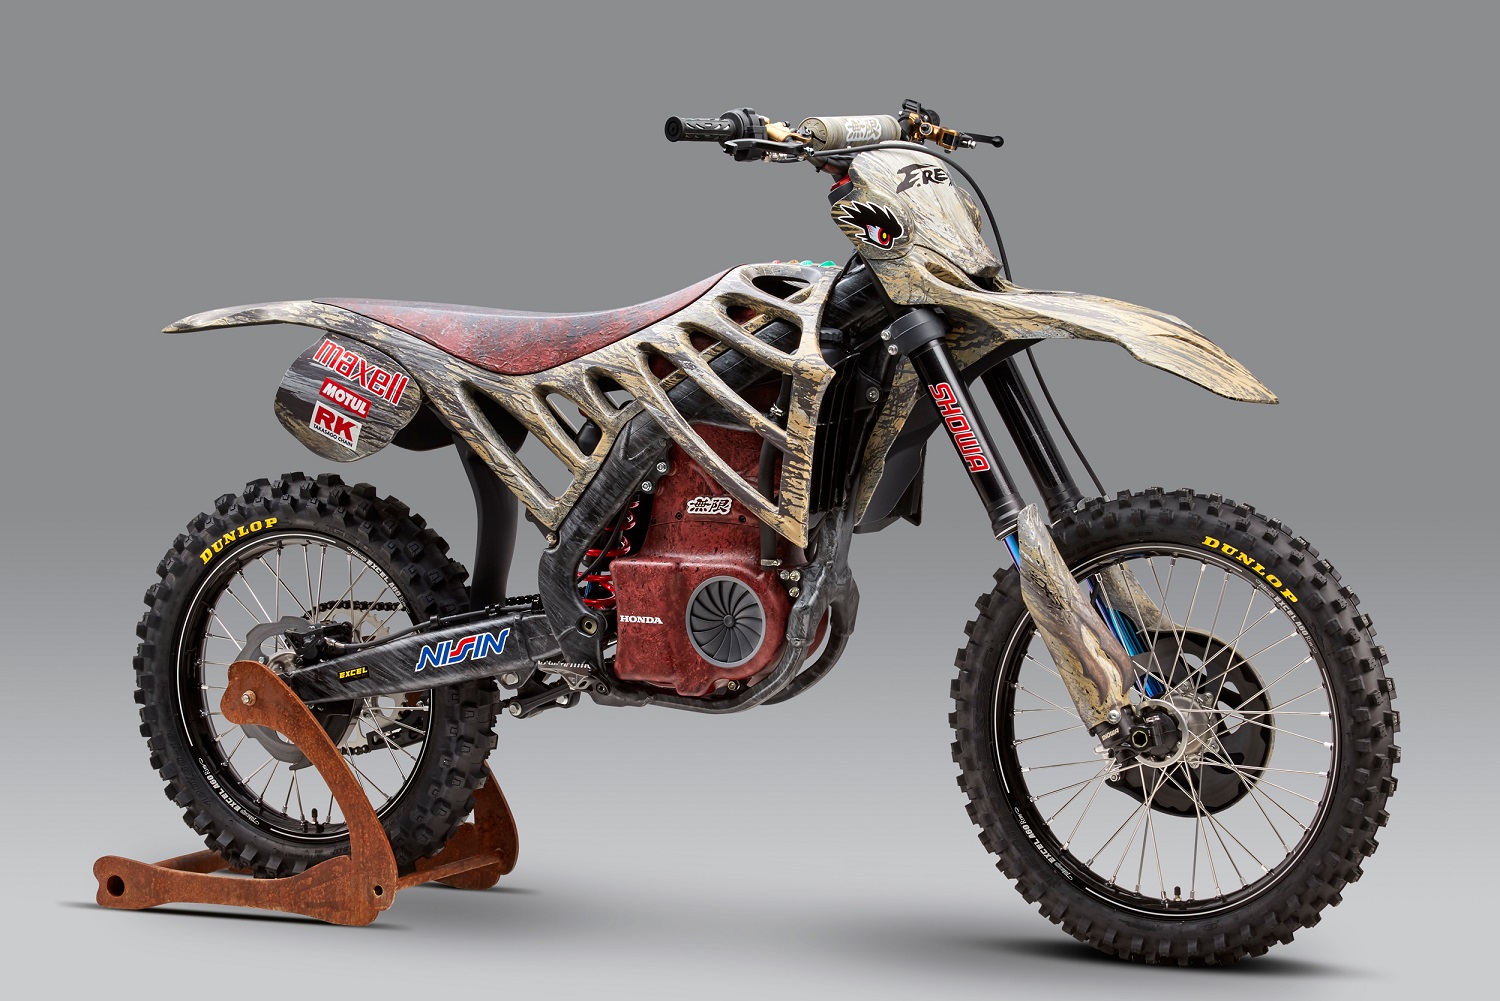 Mugen electric motorcycles